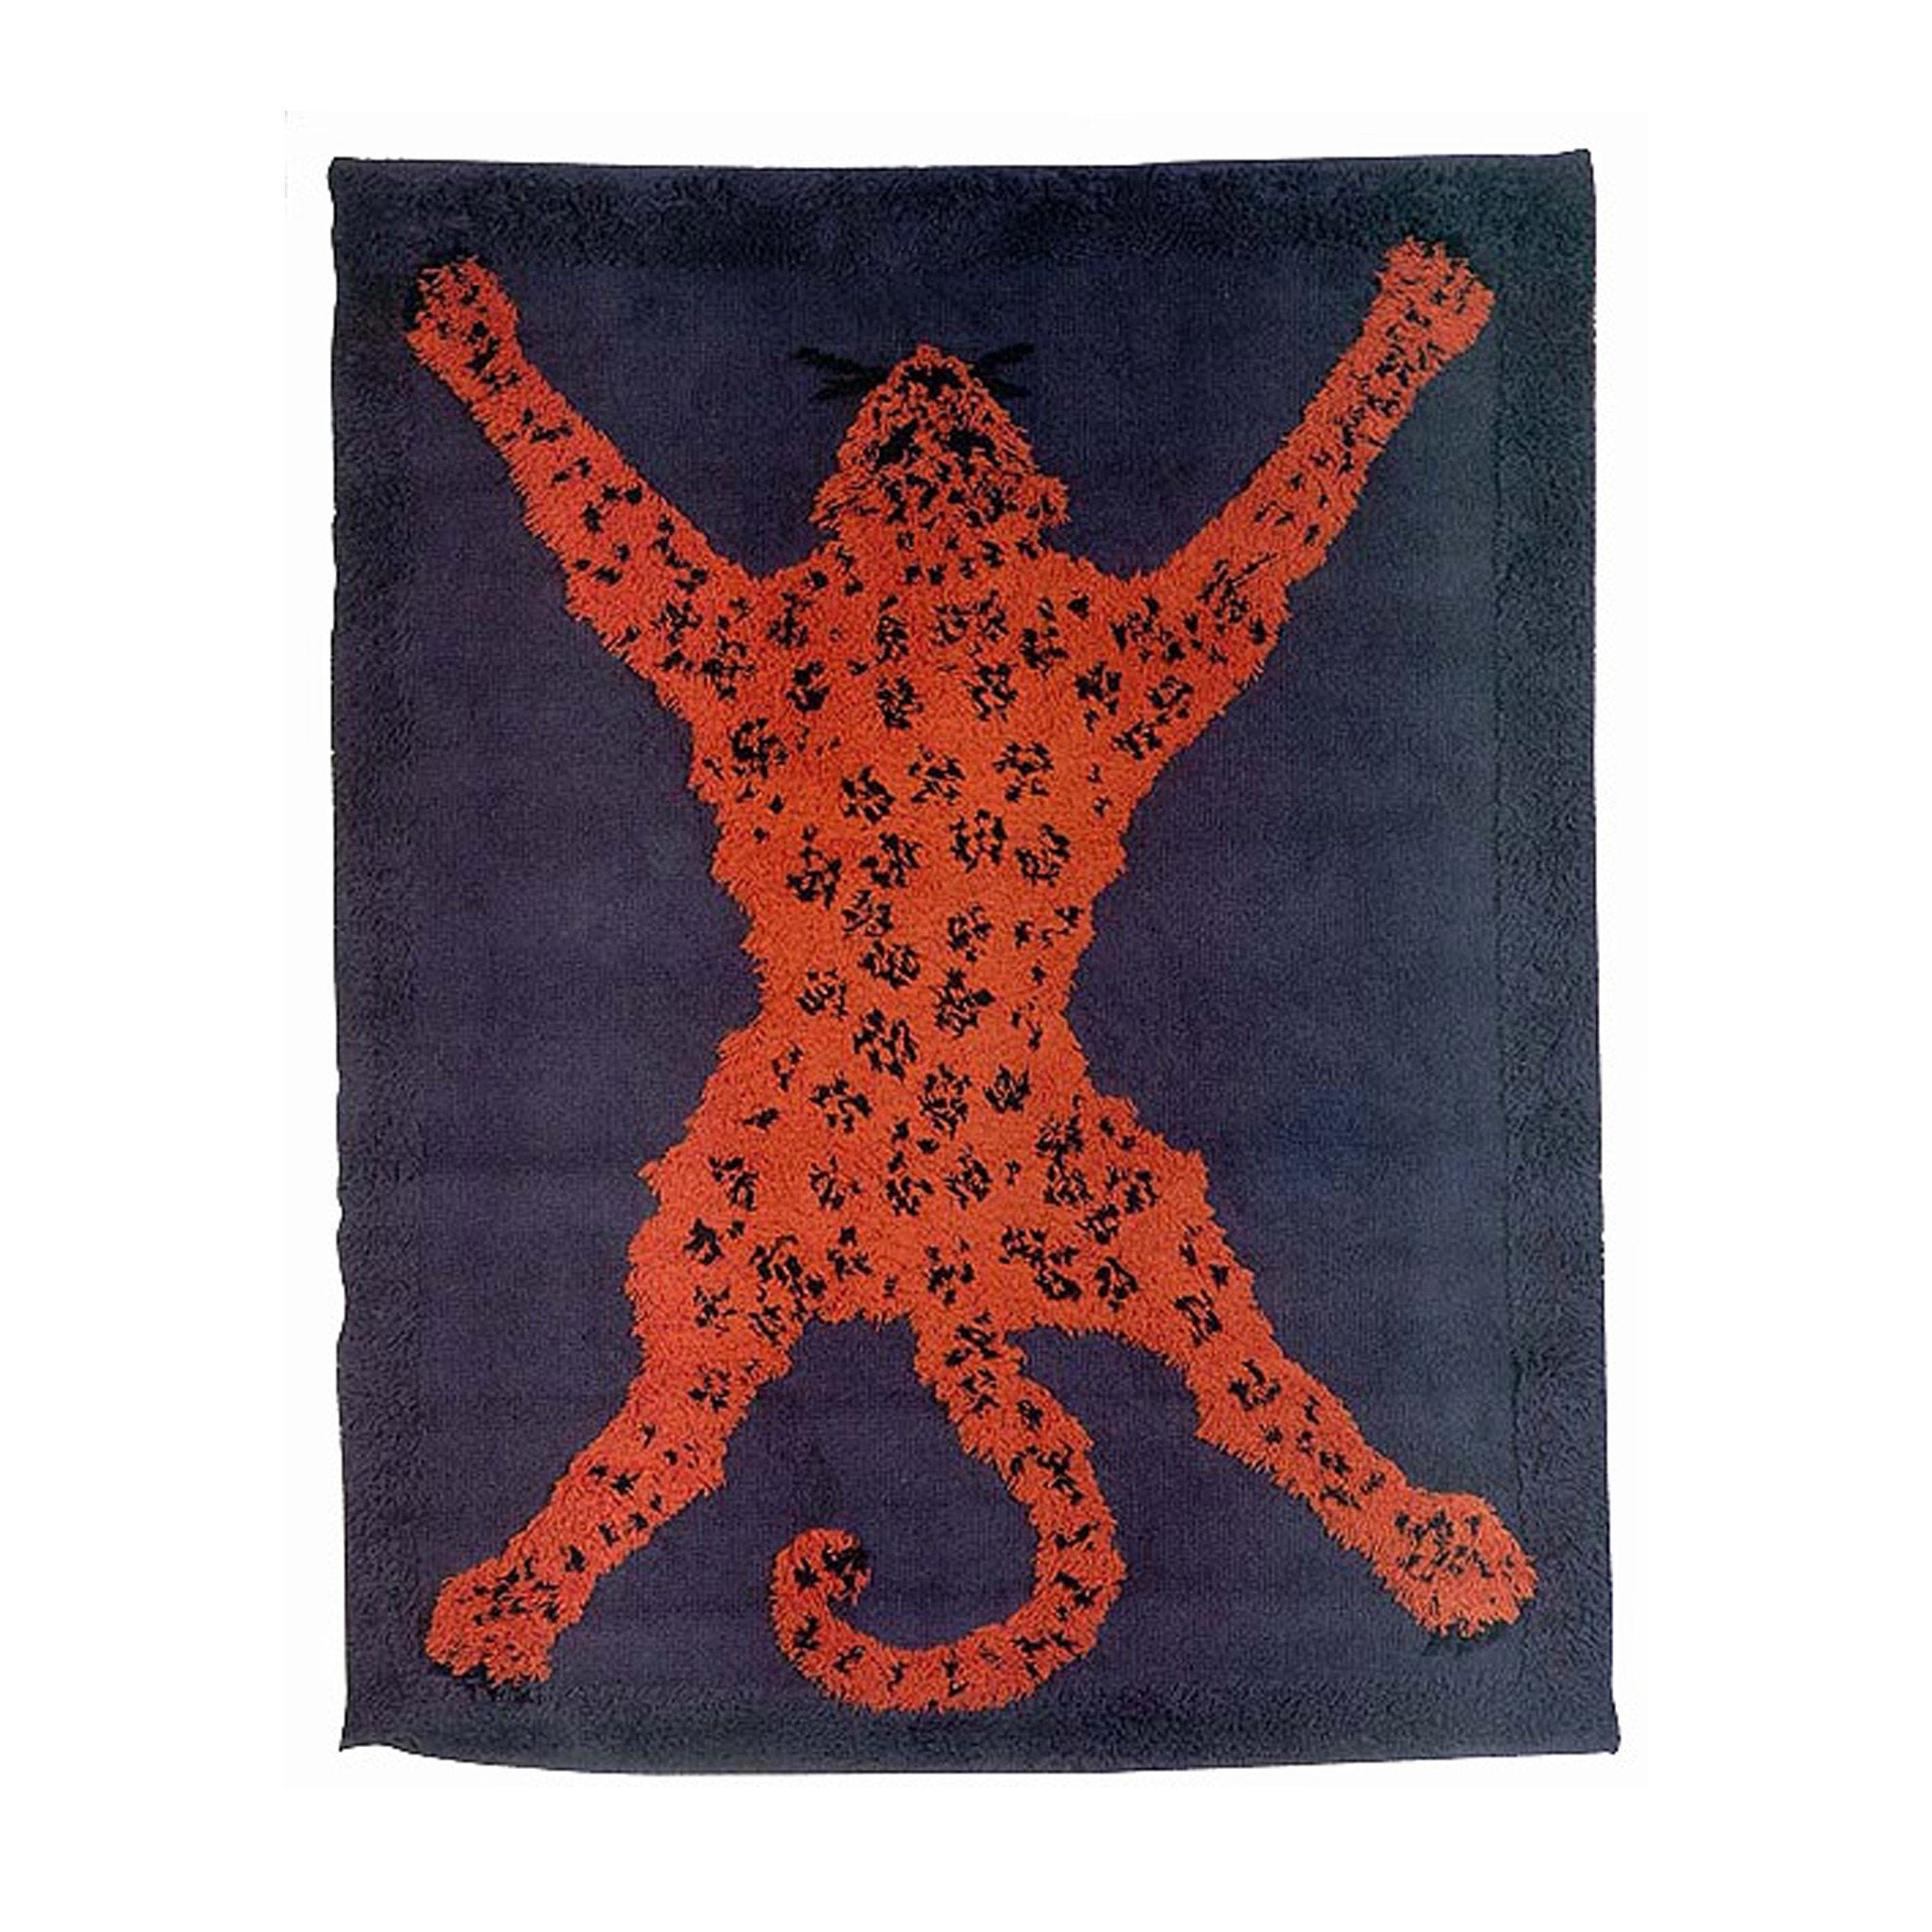 Tapipardo Rug by Gabetti and Isola, 1970 - ONEROOM